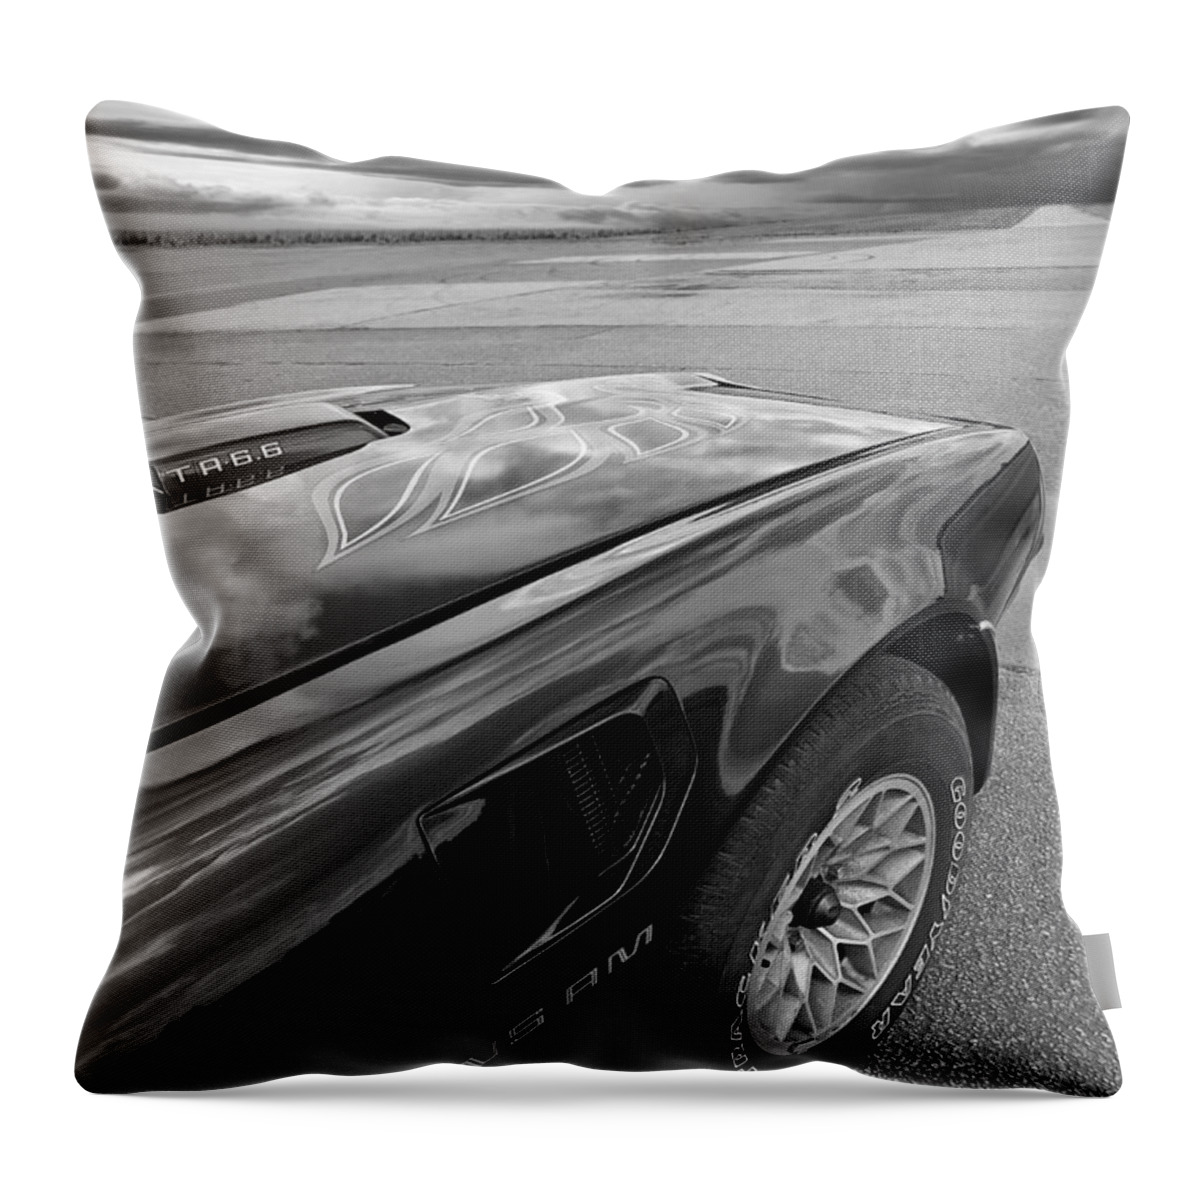 Pontiac Firebird Throw Pillow featuring the photograph 1978 Trans Am The Open Road In Black And White by Gill Billington